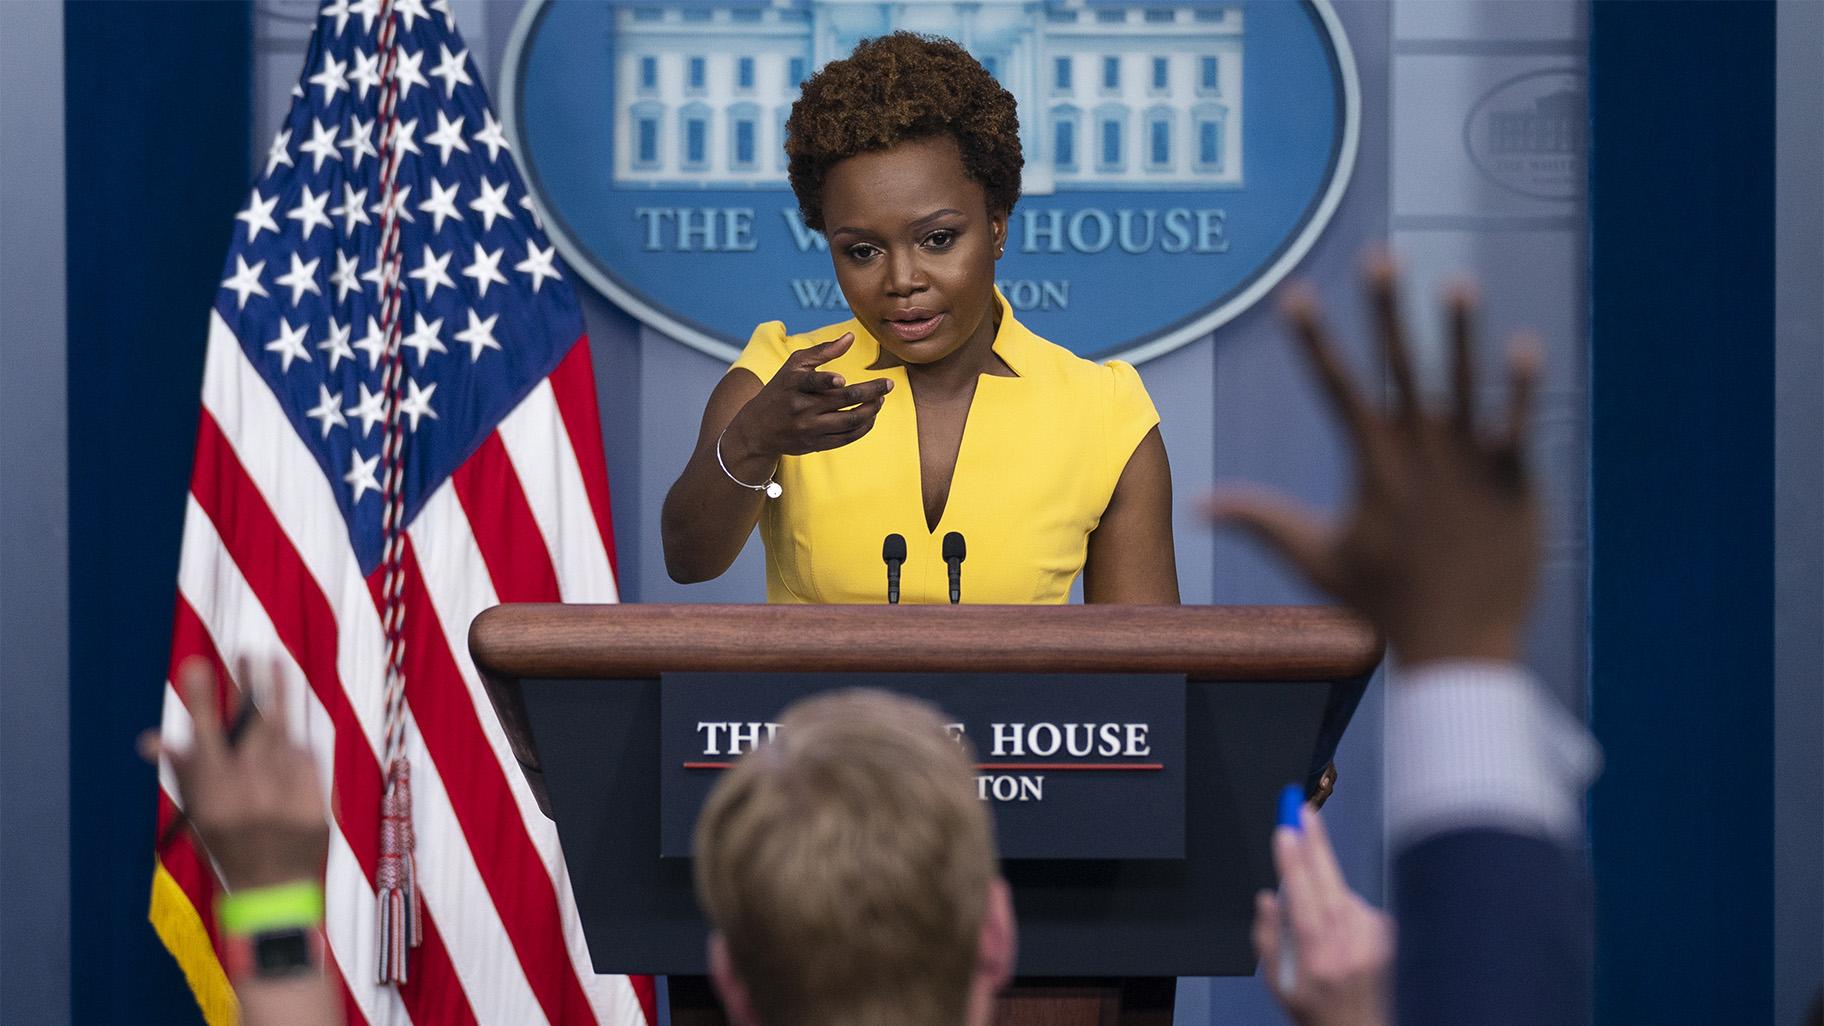 White House deputy press secretary Karine Jean-Pierre speaks during a press briefing at the White House, Wednesday, May 26, 2021, in Washington. (AP Photo / Evan Vucci)